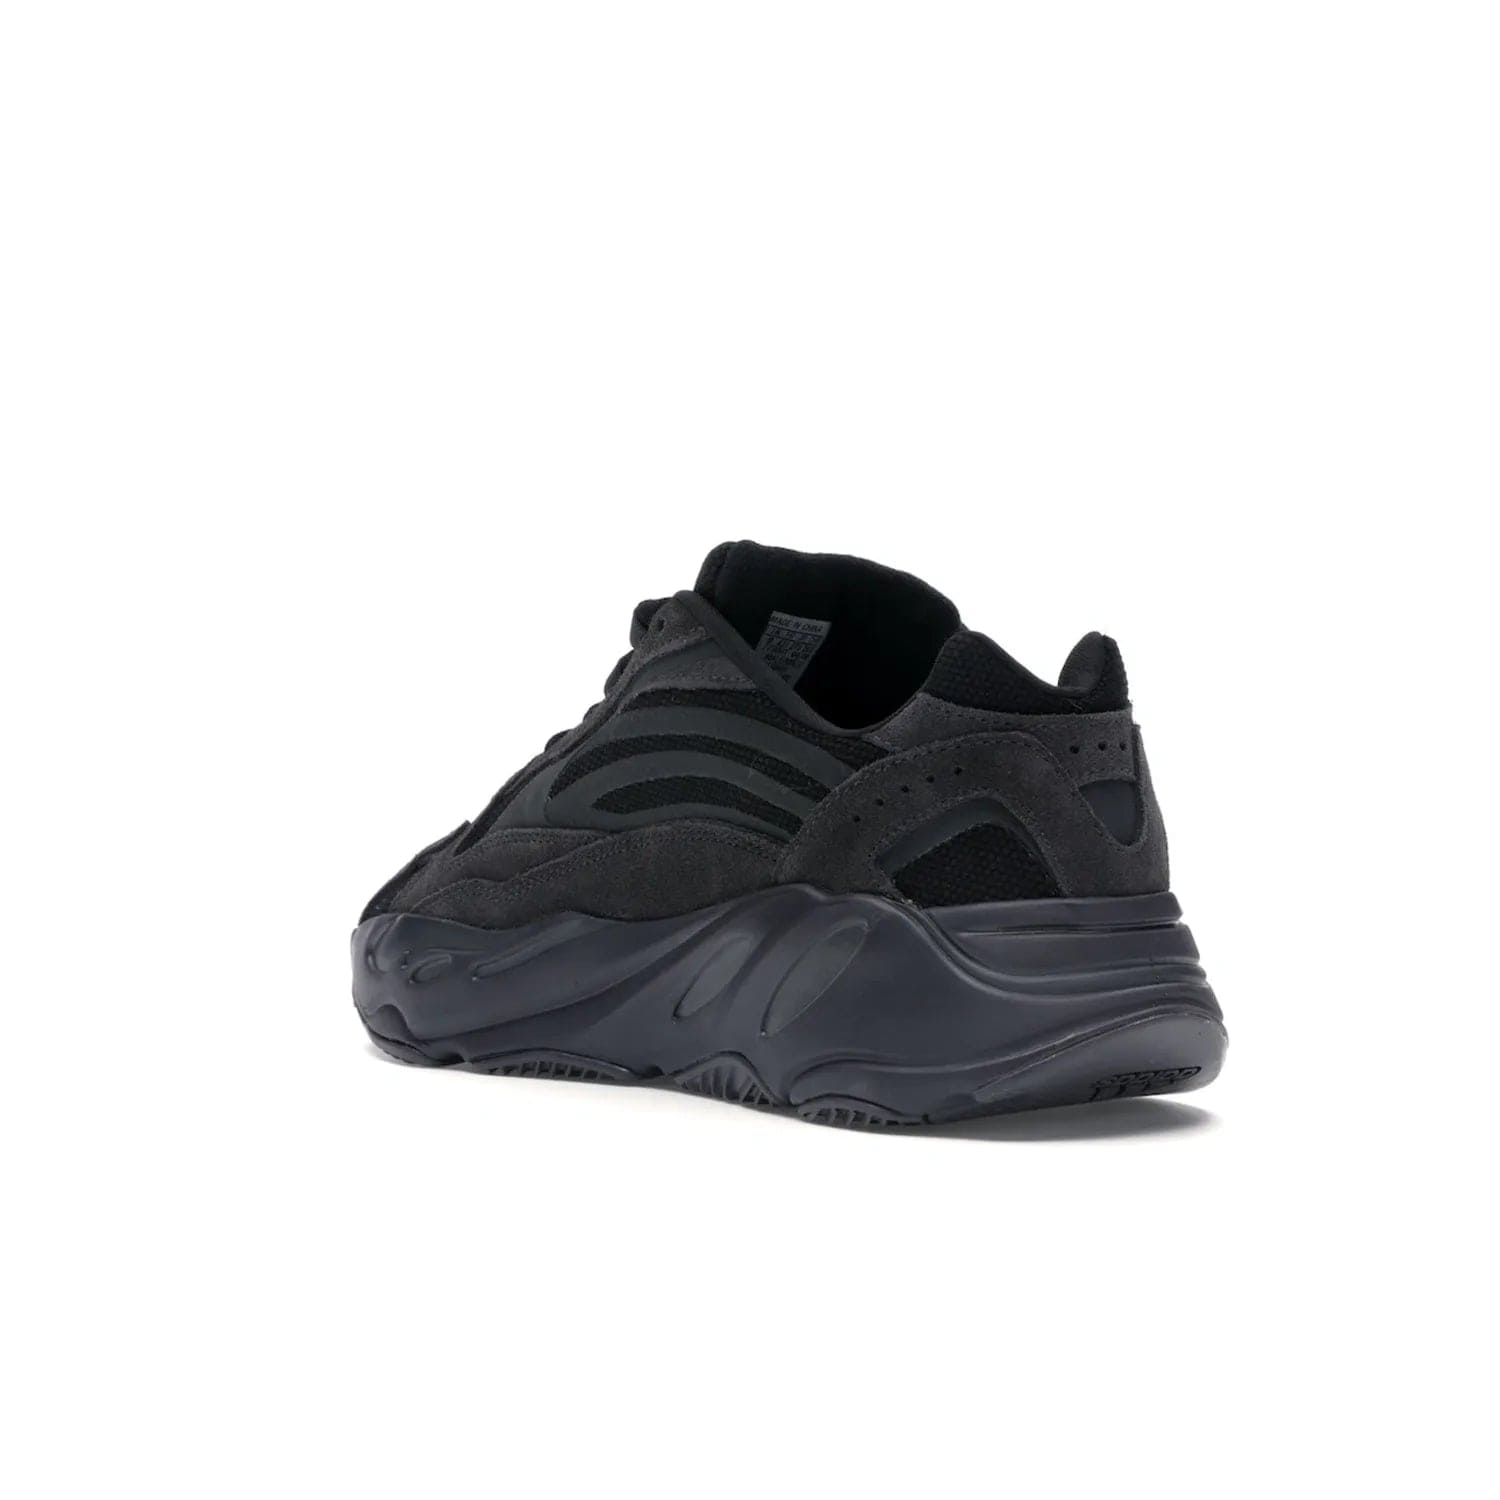 adidas Yeezy Boost 700 V2 Vanta - Image 24 - Only at www.BallersClubKickz.com - Introducing the adidas Yeezy Boost 700 V2 Vanta - a sleek and stylish all-black design featuring a combination of mesh, leather, and suede construction with signature Boost cushioning in the sole. The ultimate in comfort and support.